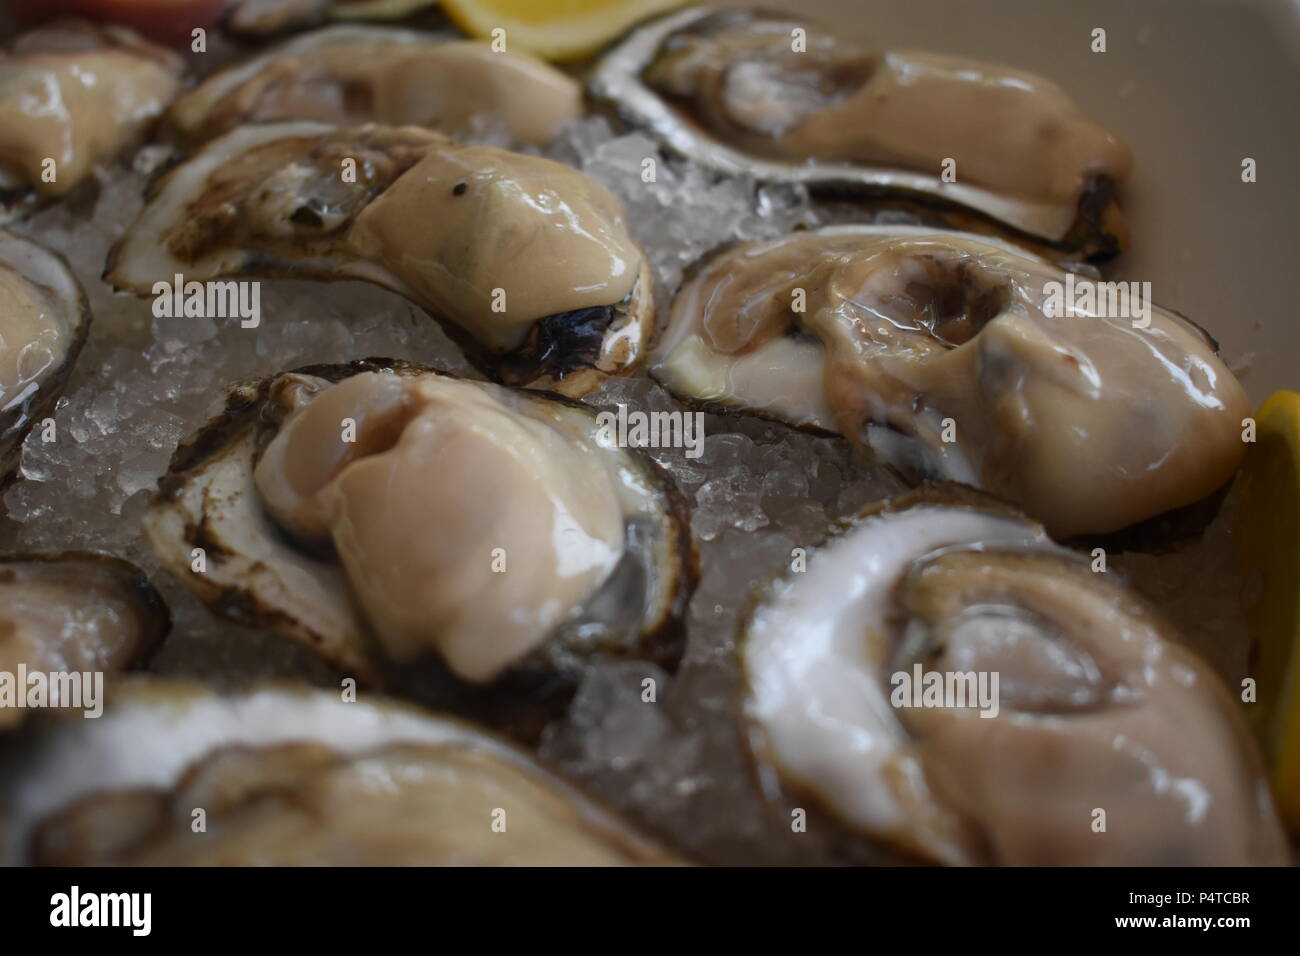 Fresh raw aquaculture oysters on ice from the Chesapeake Bay at Wild Country Seafood in Annapolis, Maryland Stock Photo